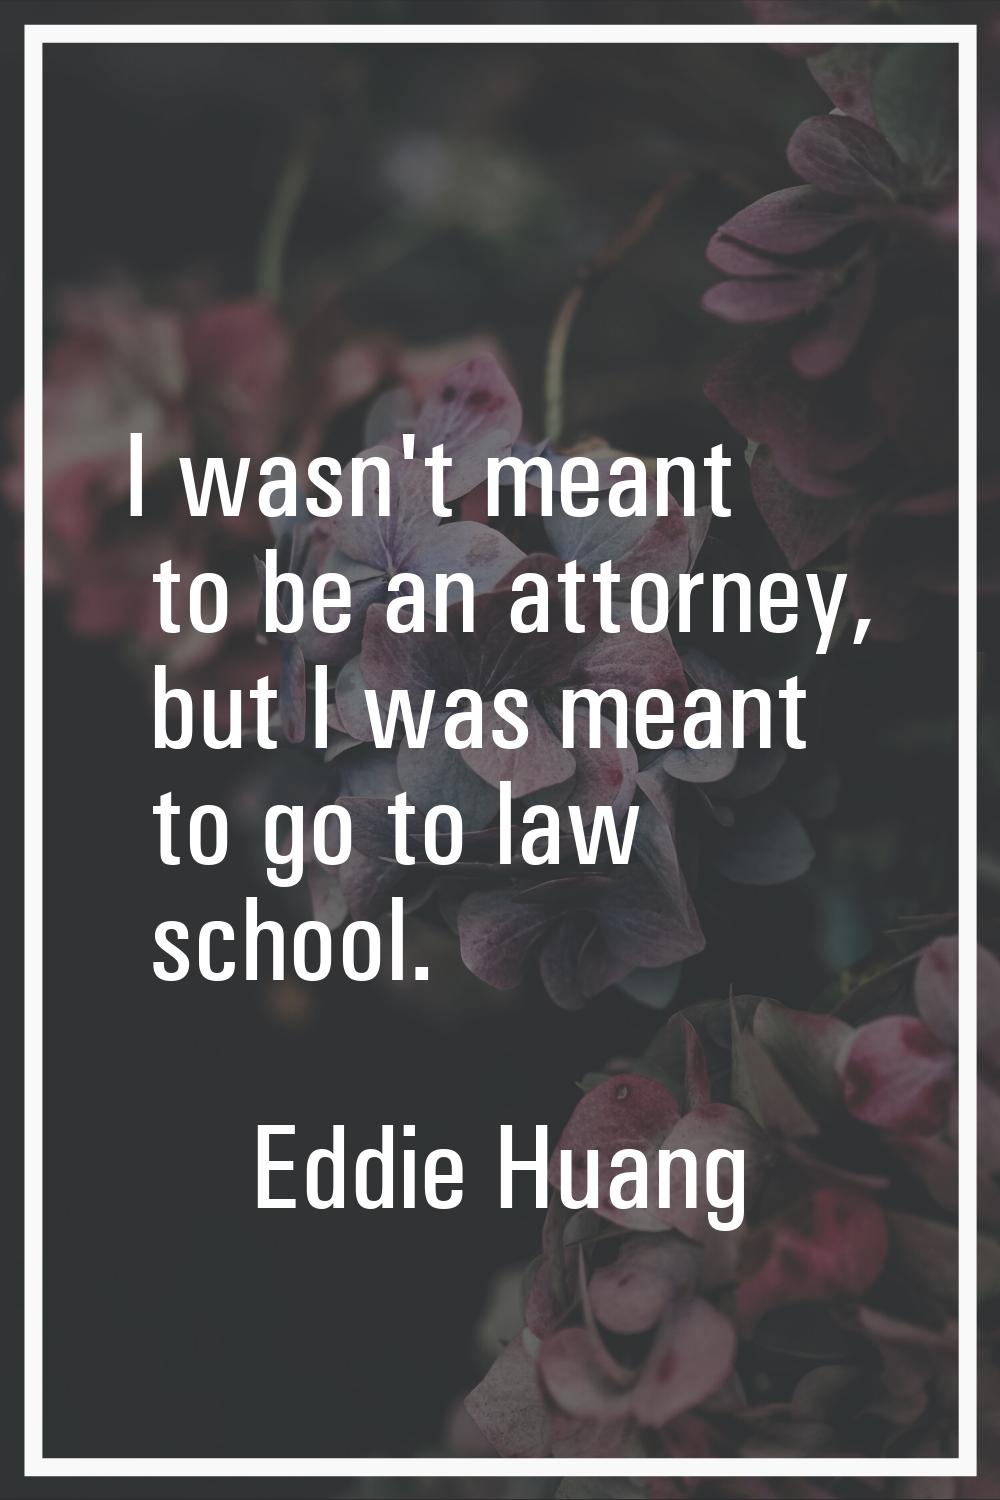 I wasn't meant to be an attorney, but I was meant to go to law school.